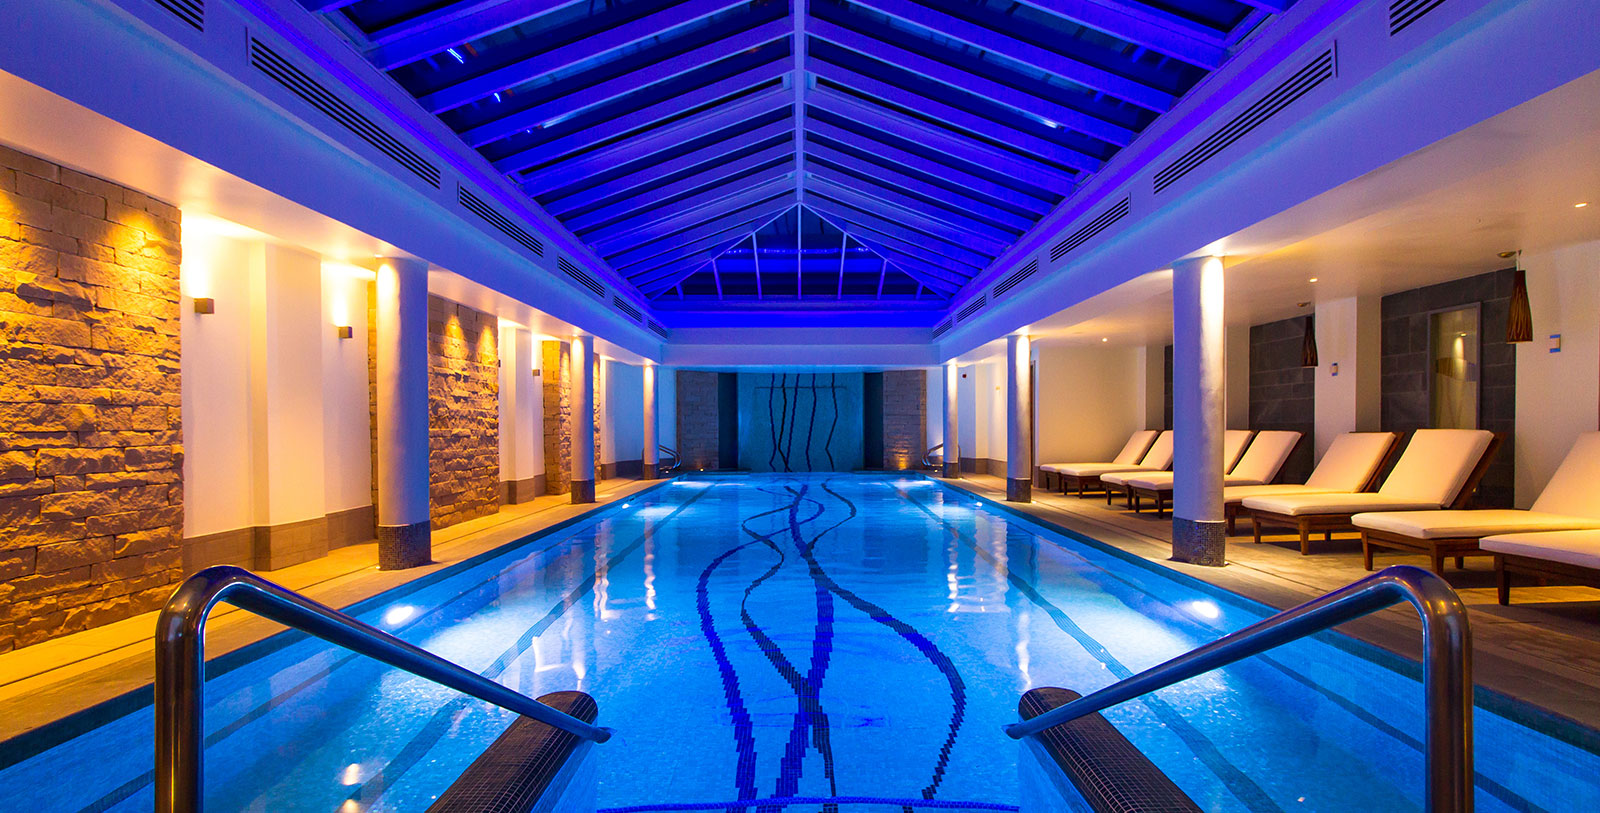 Image of Spa Pool Old Course Hotel, Golf Resort & Spa, 15th Century, Member of Historic Hotels Worldwide, in St. Andrews, Scotland, Spa